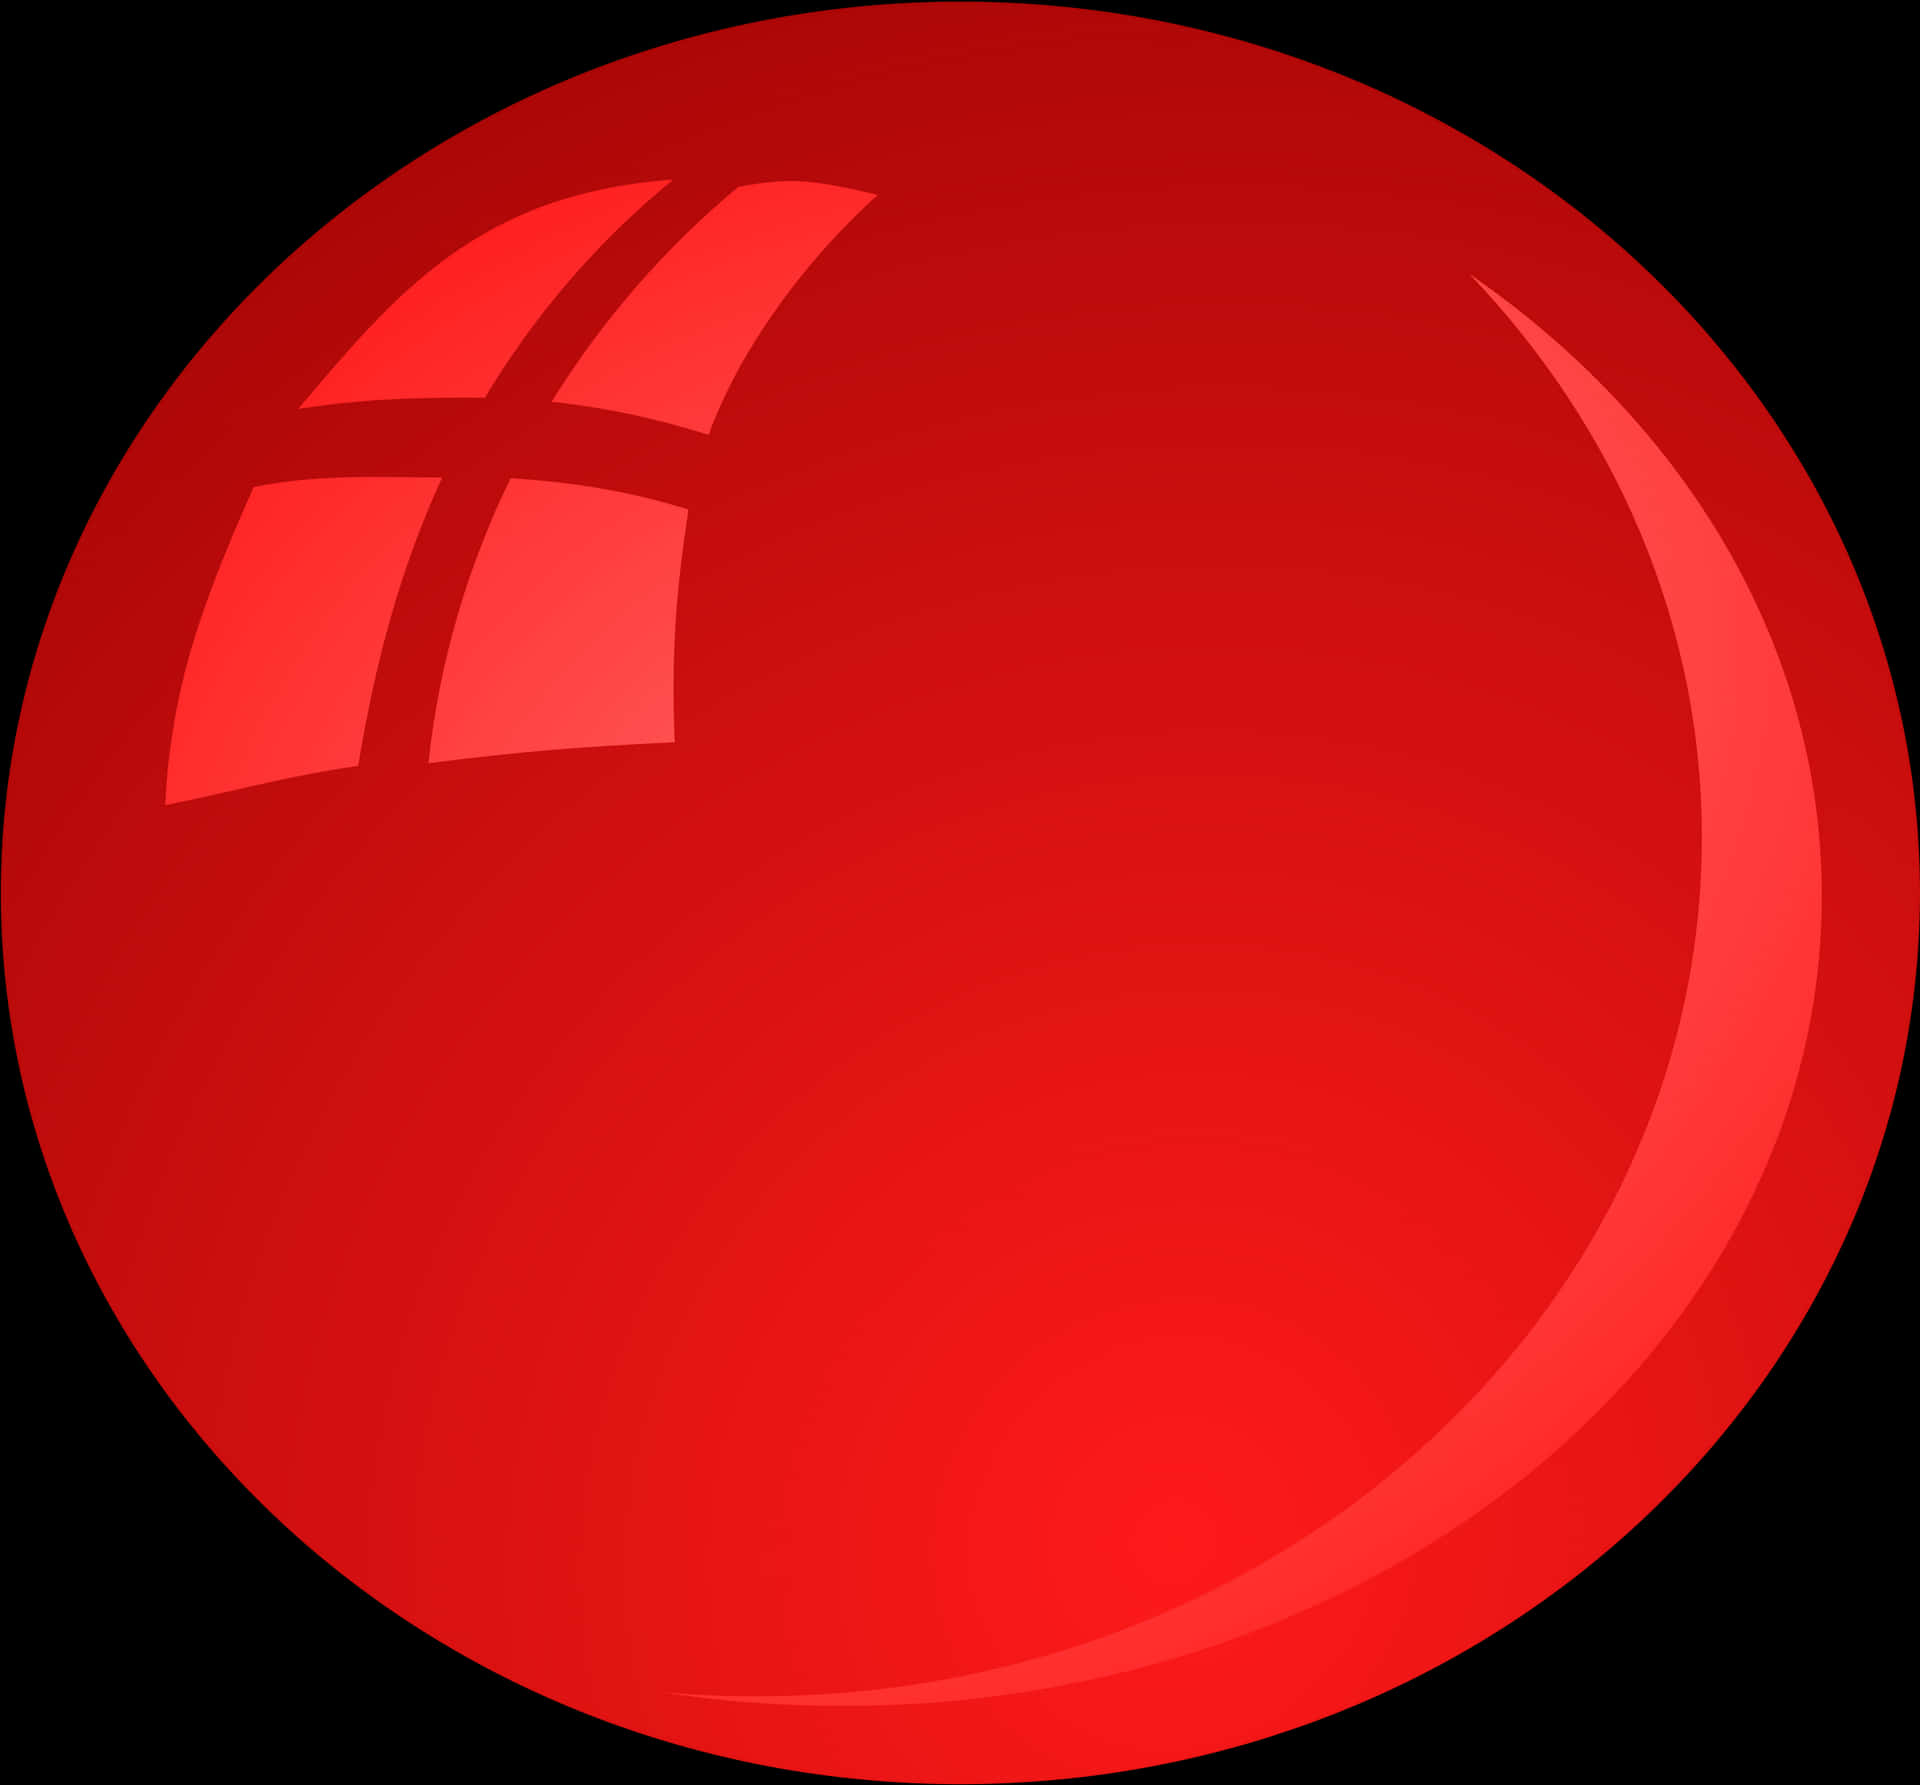 Red Glossy Bubble Graphic PNG